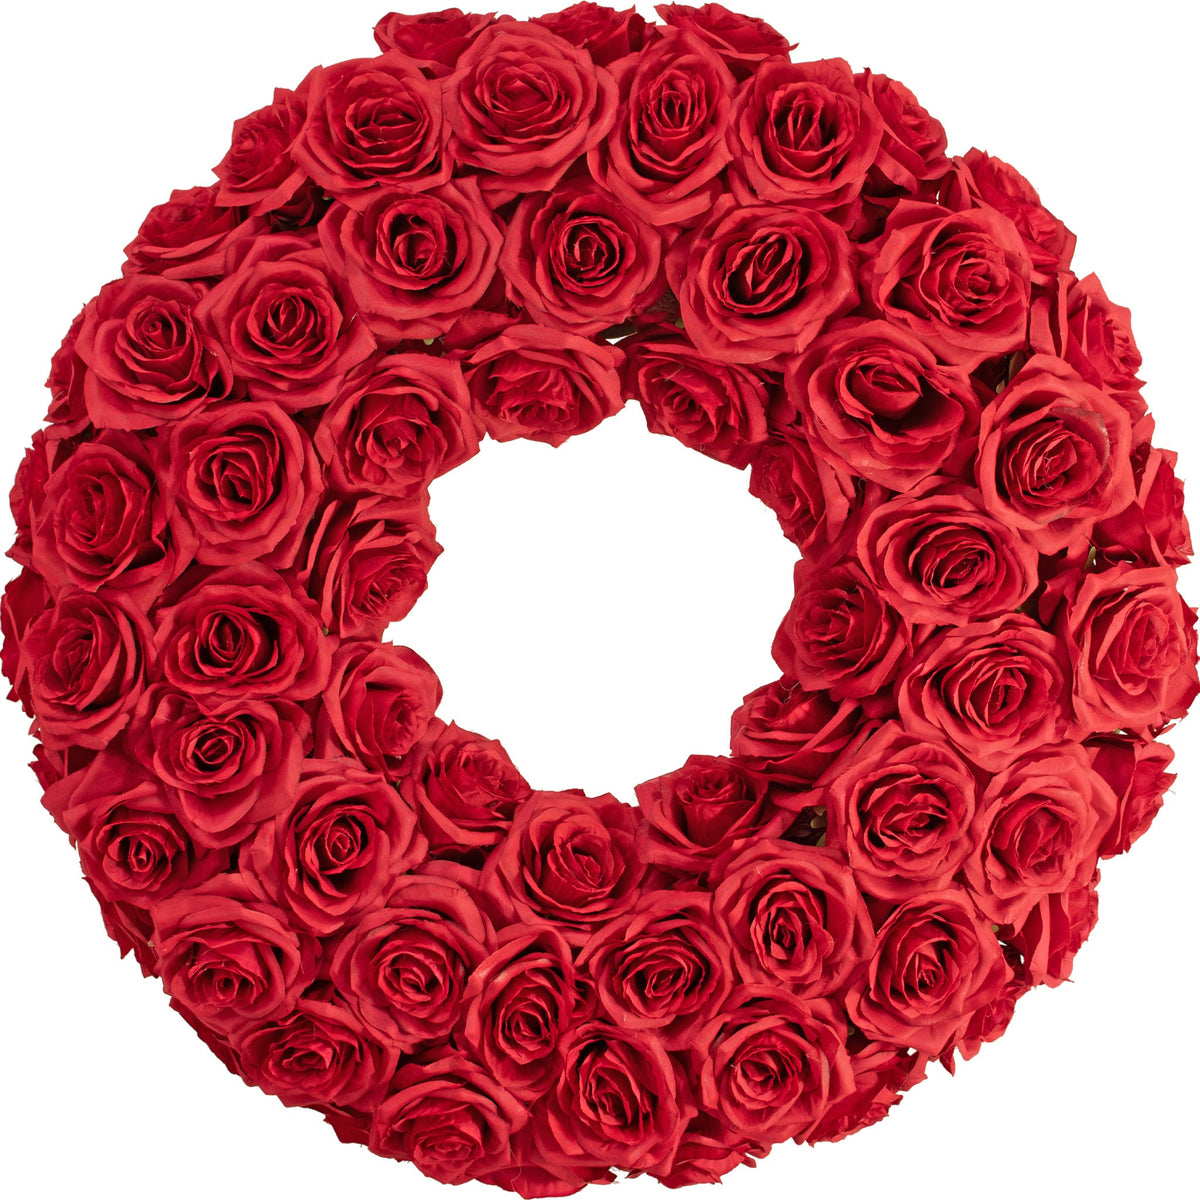 22 Inch Diameter 3-Dimensional Red Rose Wreath made of artificial rosebud flowers on a foam core and wooden frame.